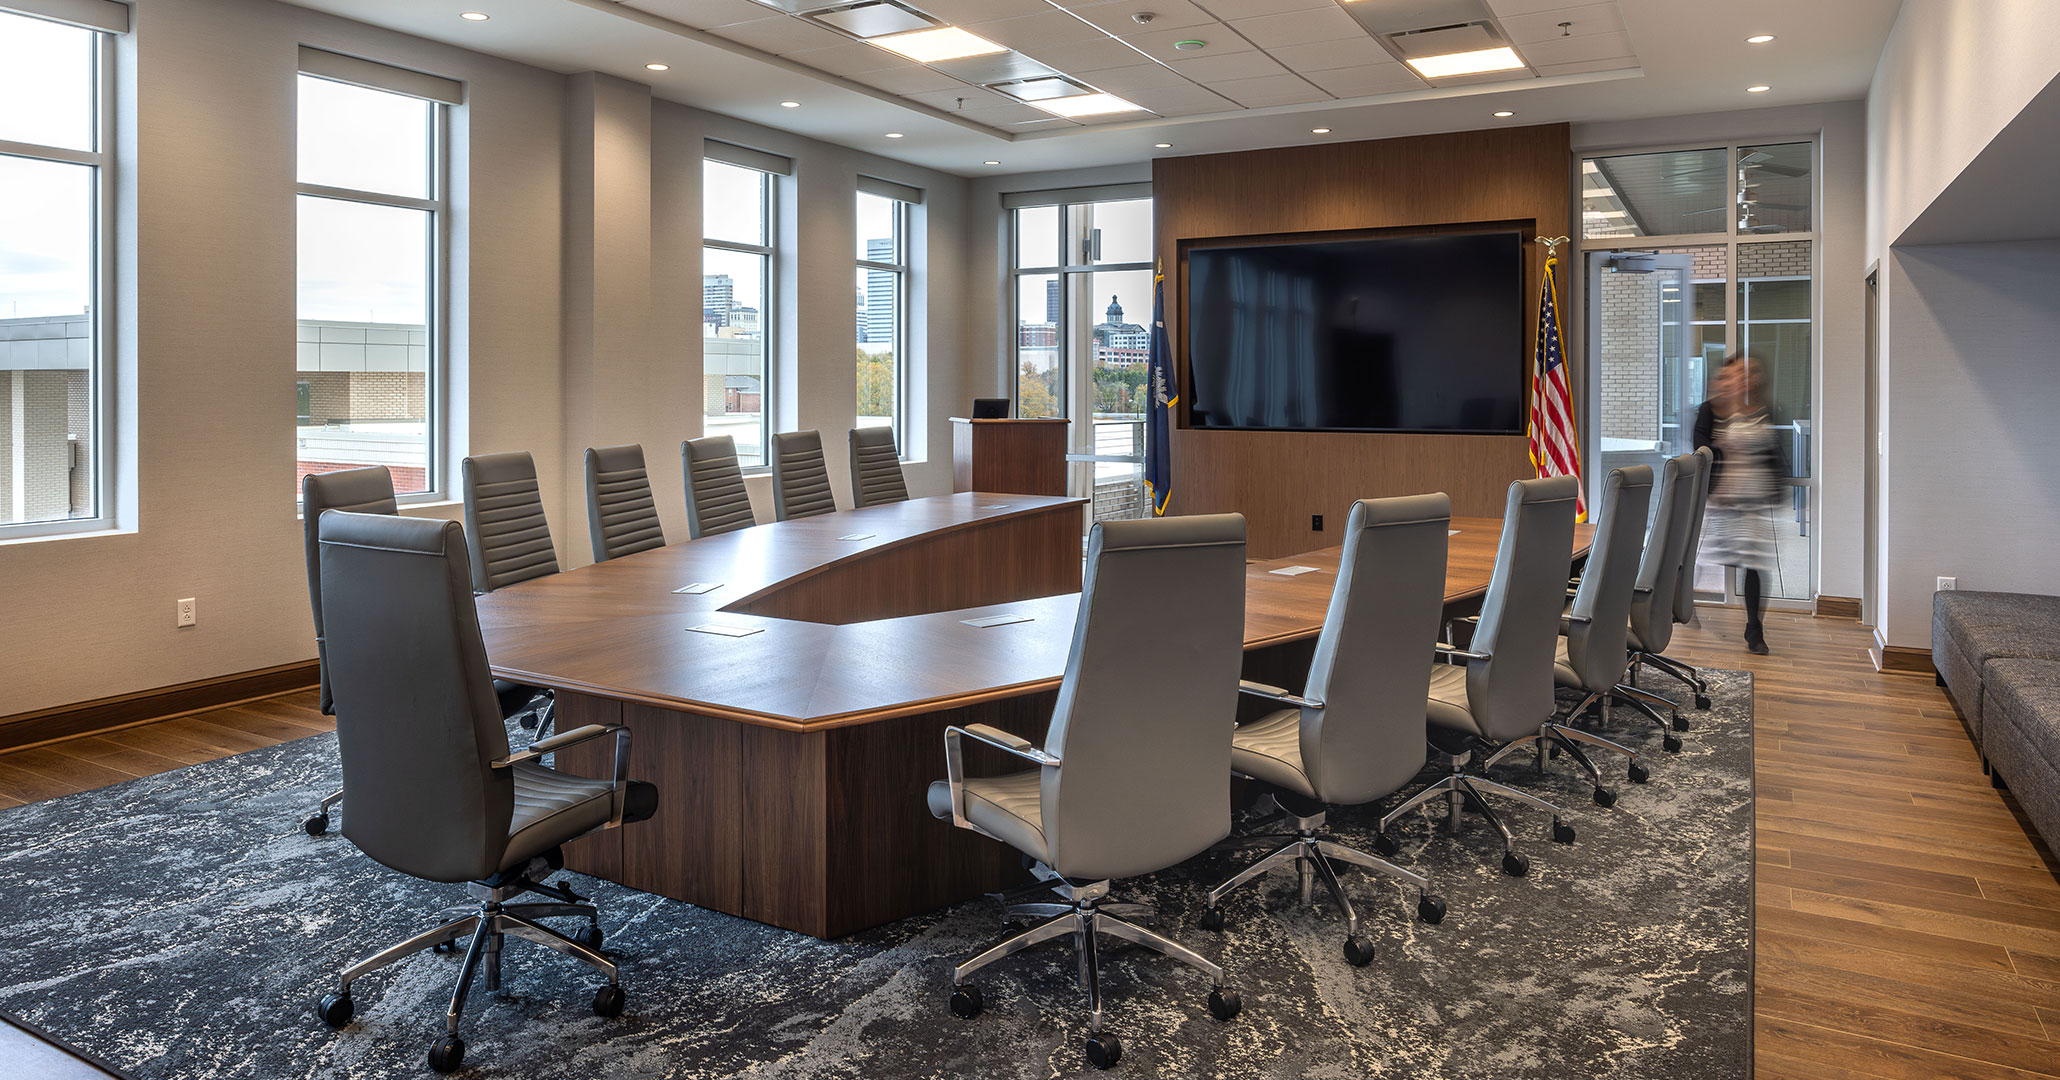 The executive board room at SCU’s new headquarters downtown offers views to the Statehouse.